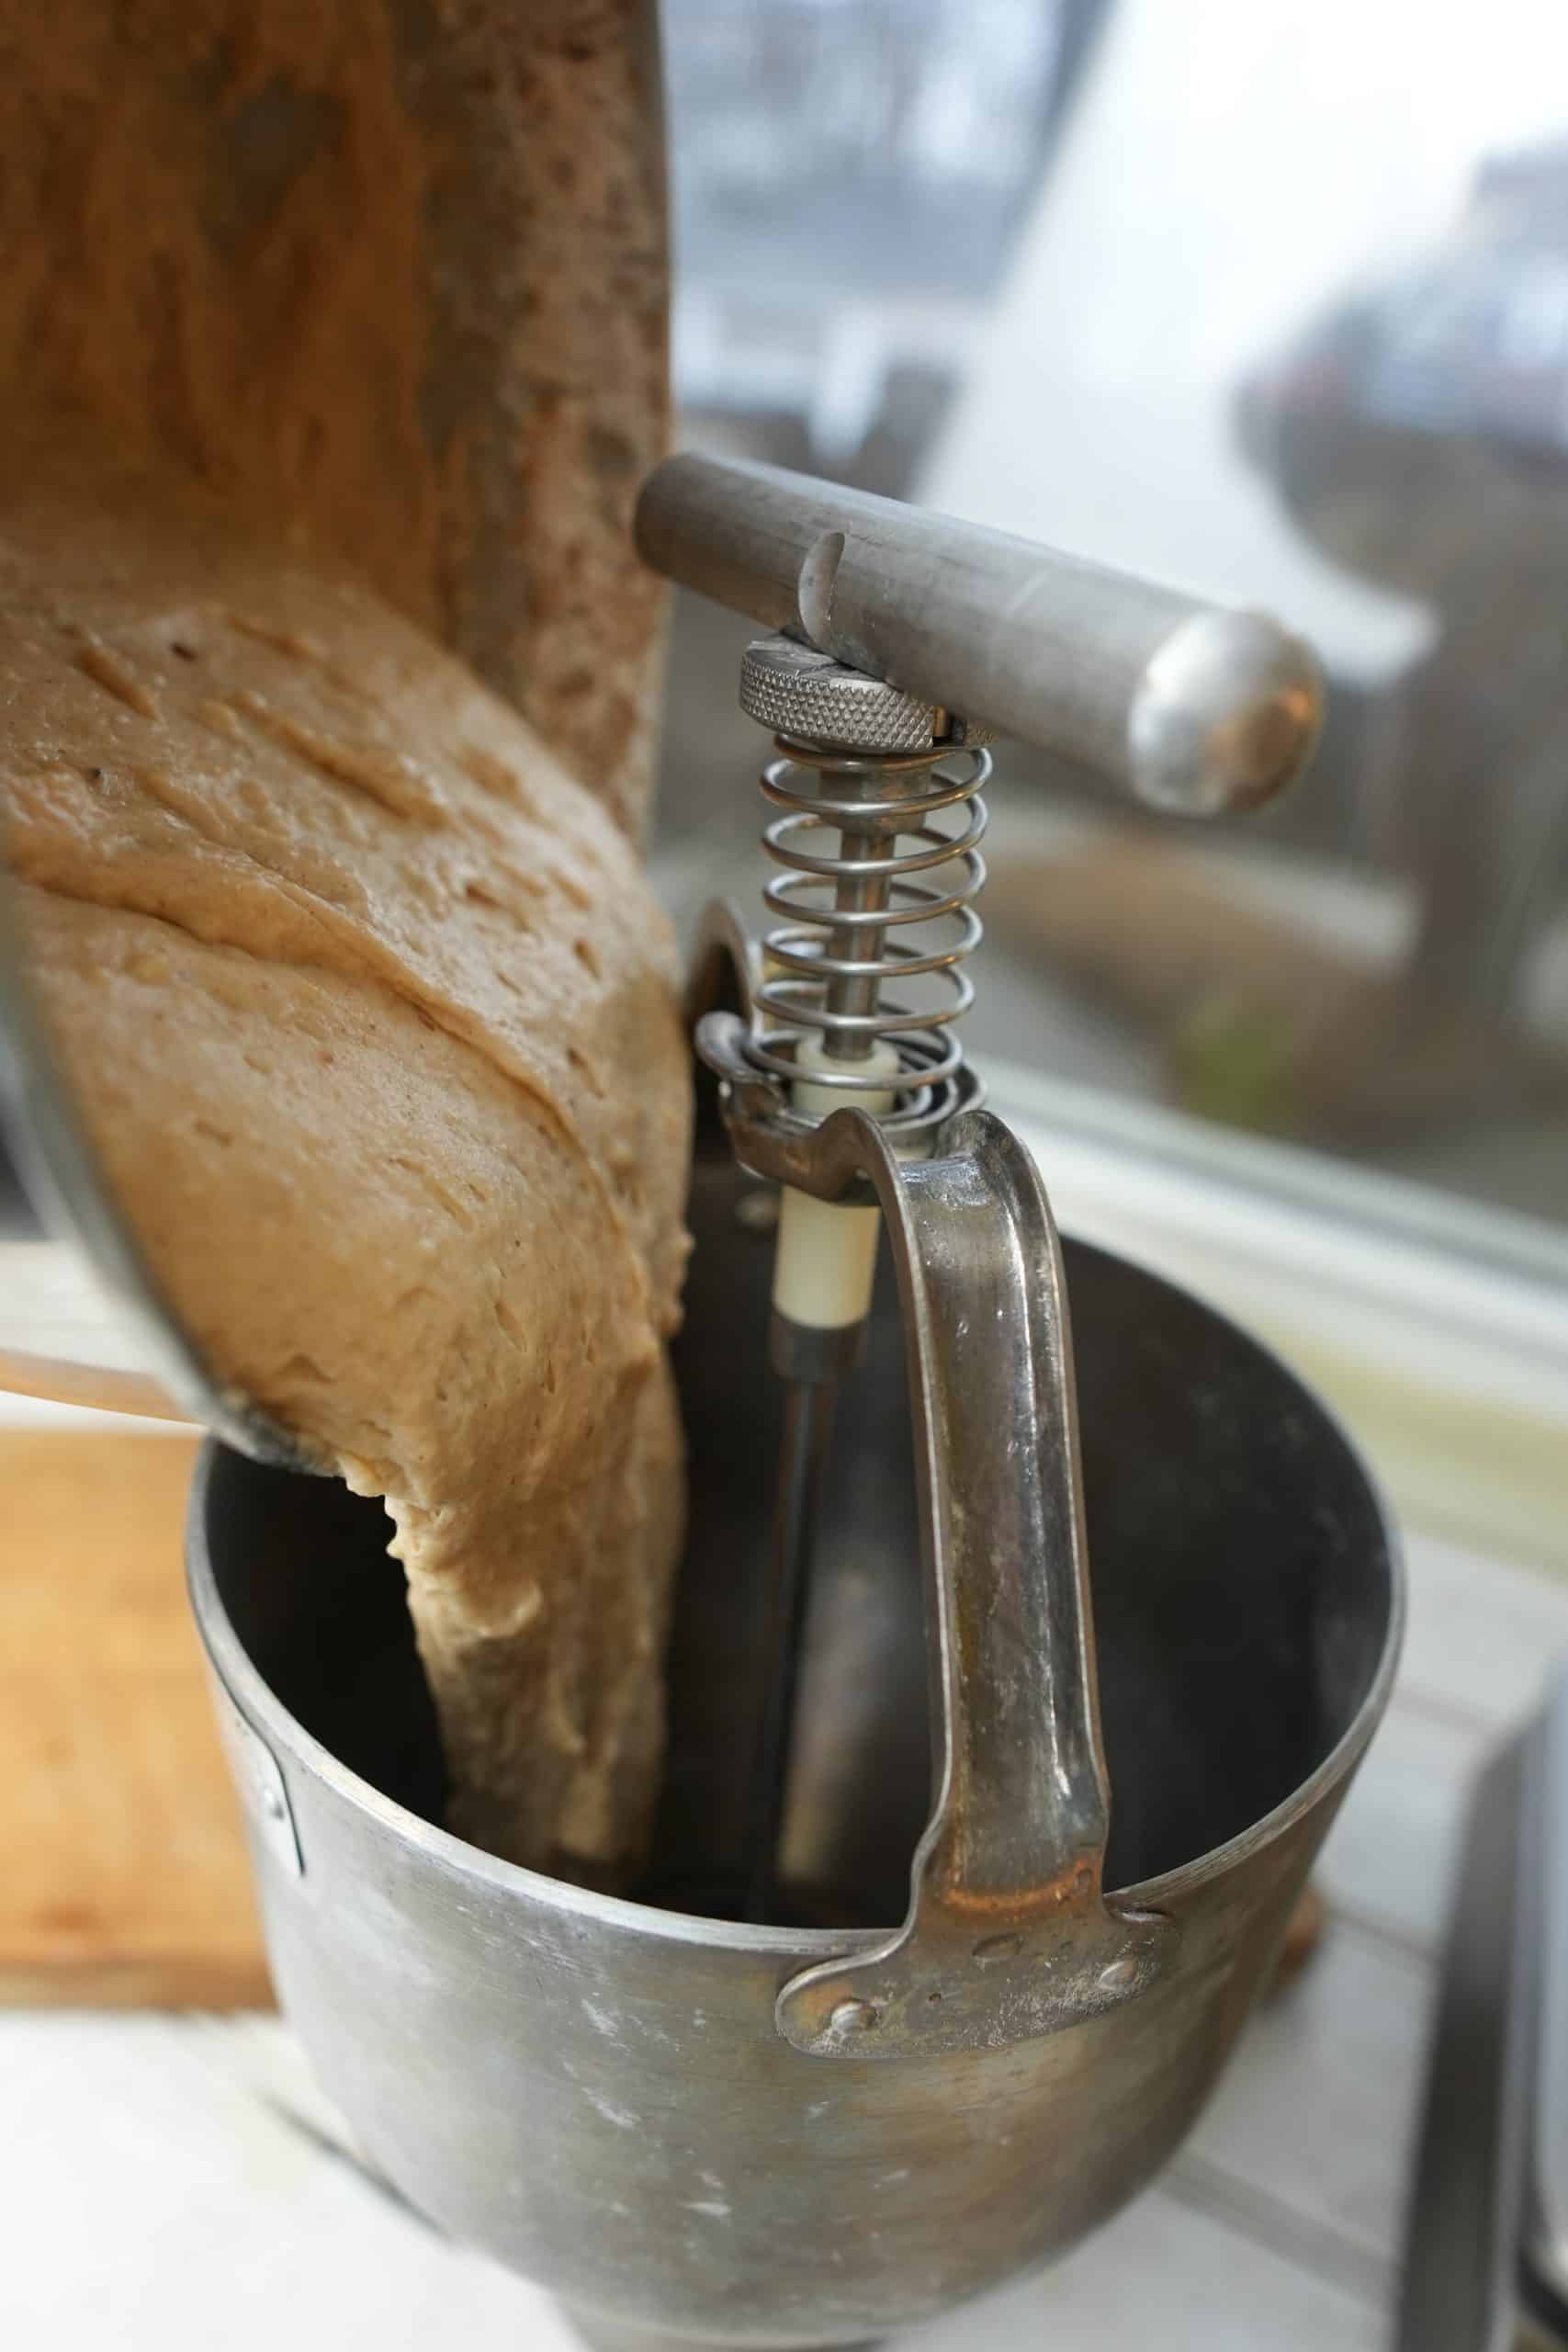 Batter being poured into the hoper of a donut dropper